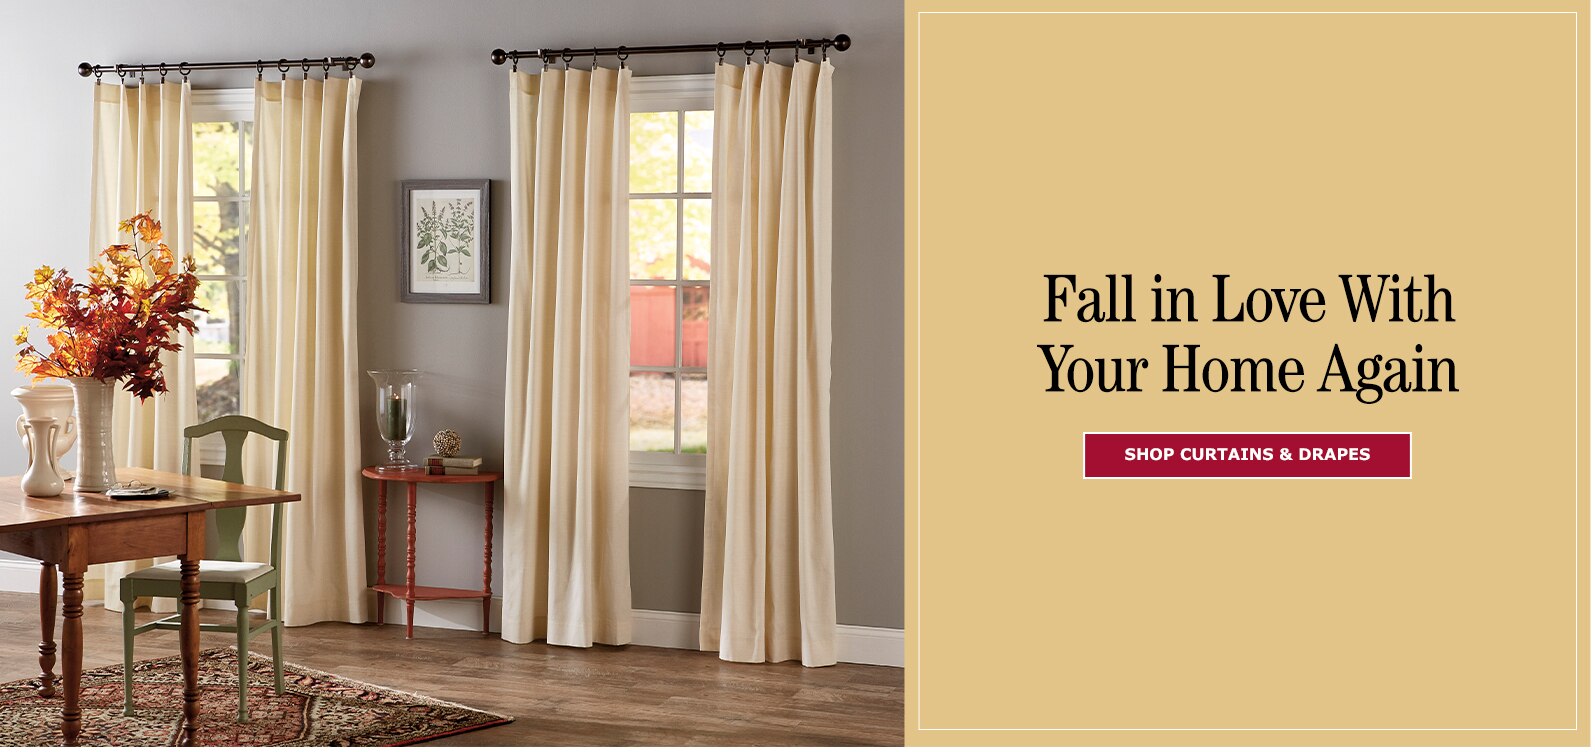 Fall in Love with Your Home Again. Shop Curtains & Drapes